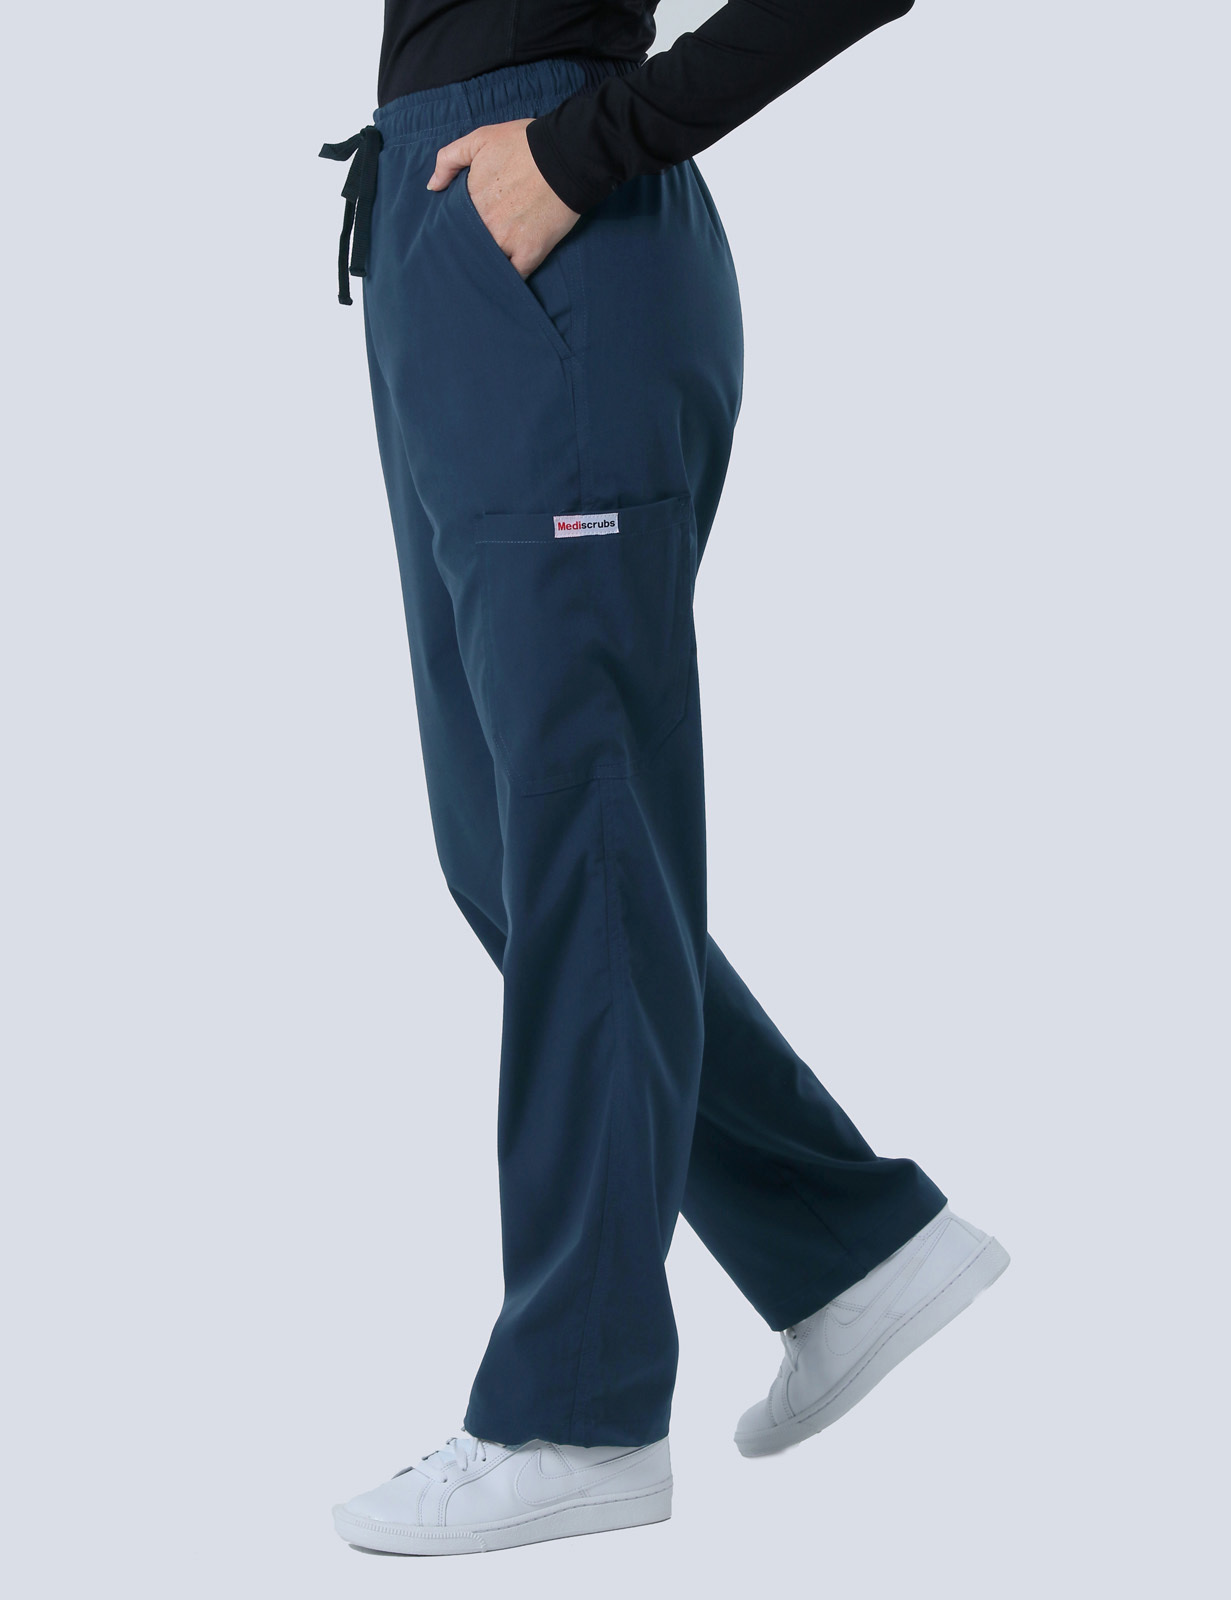 Rockhampton Base Hospital - Surgical Unit (Women's Fit Solid Scrub Top and Cargo Pants in Navy incl Logos)